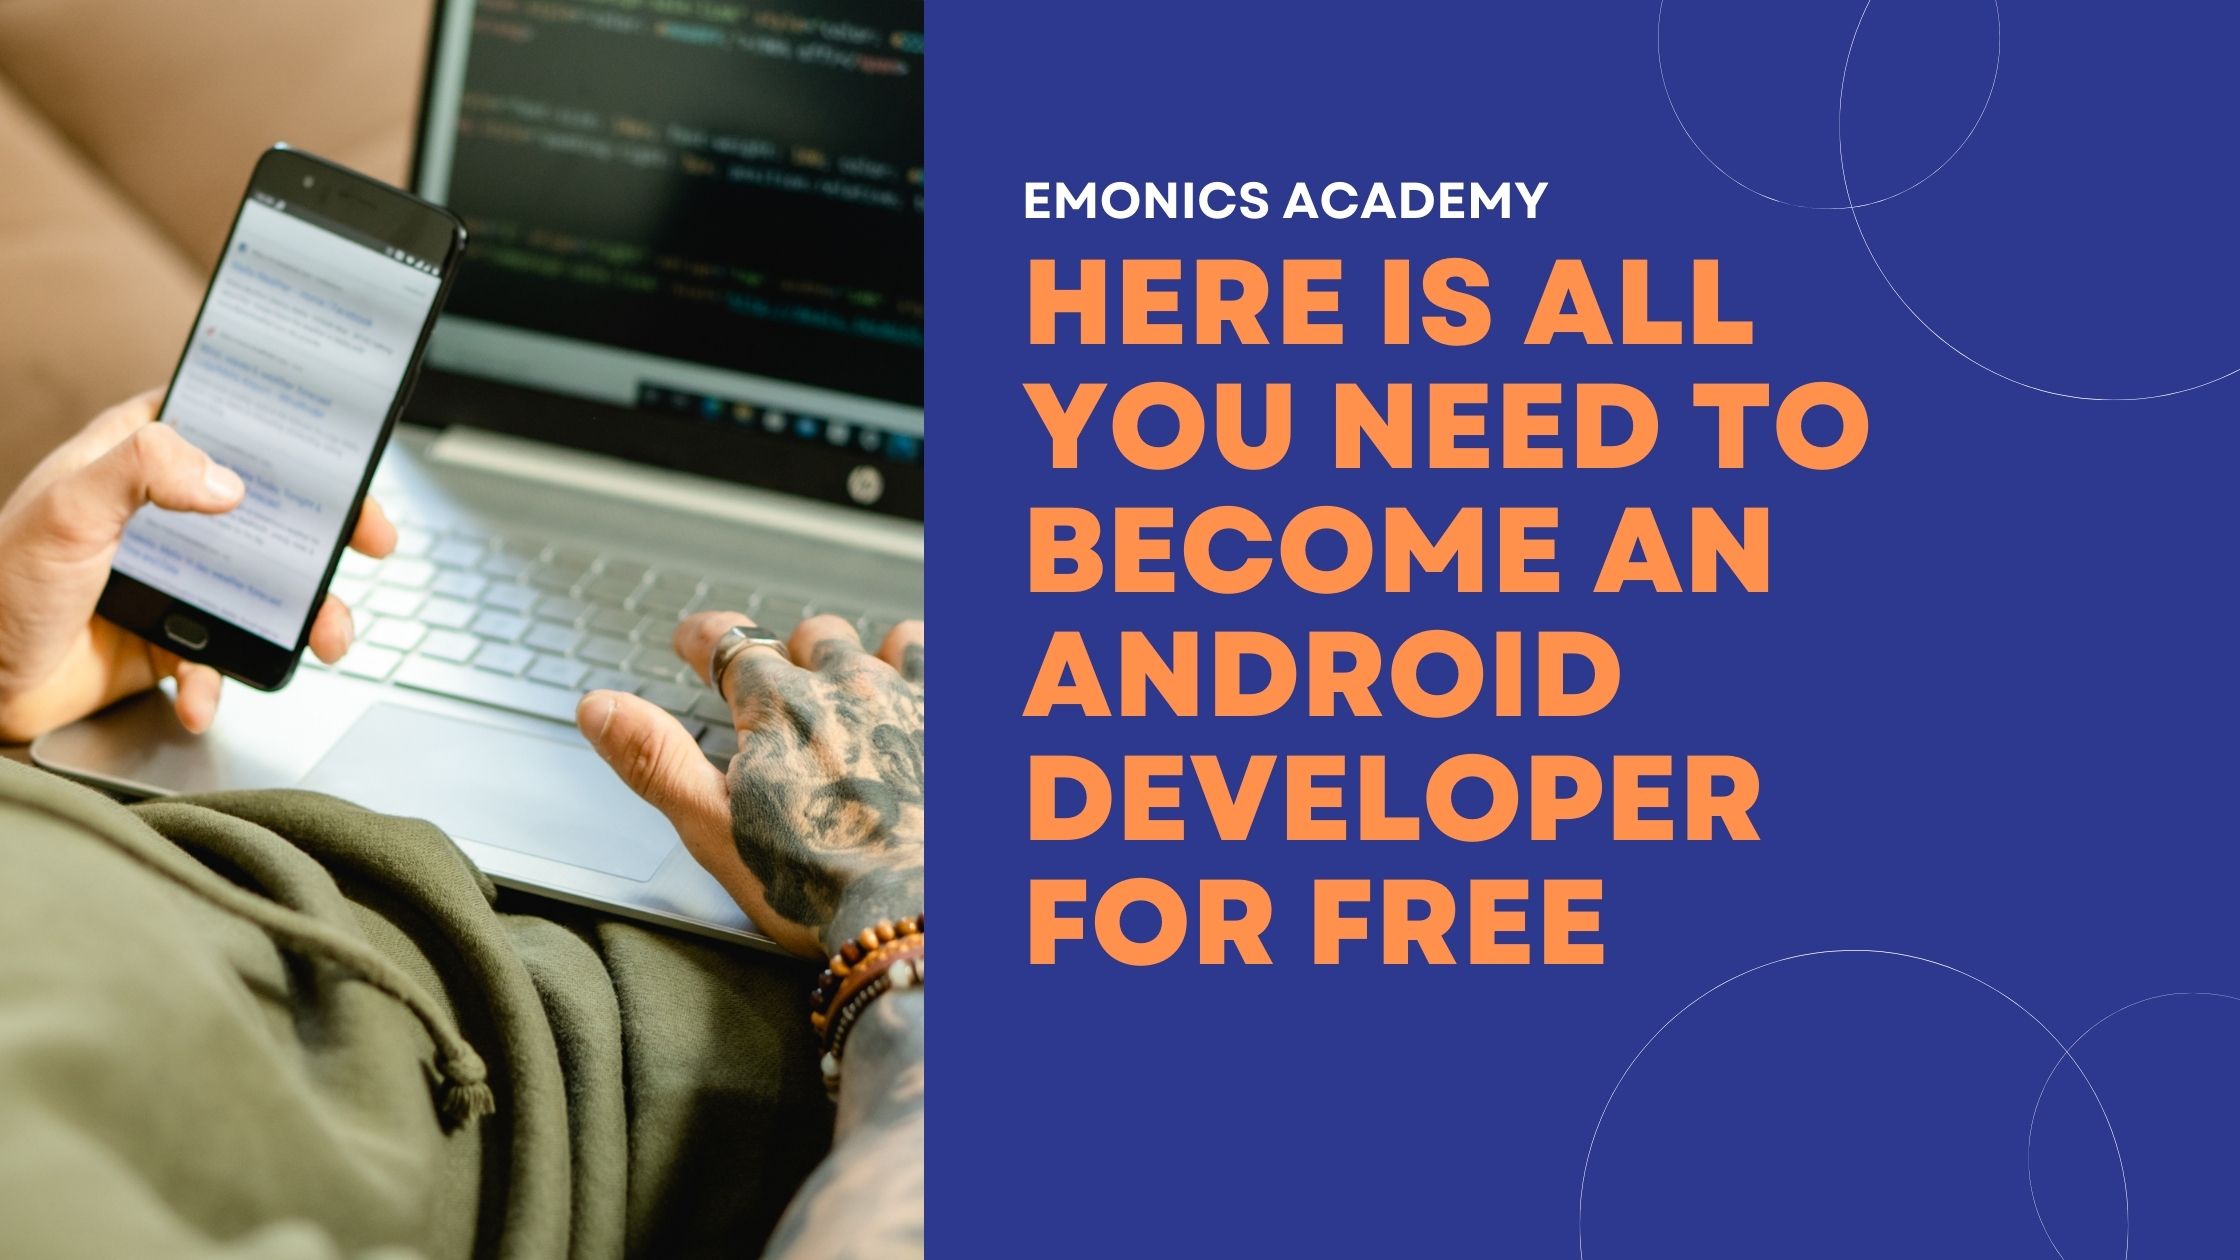 All you need to know to become an Android Developer for free